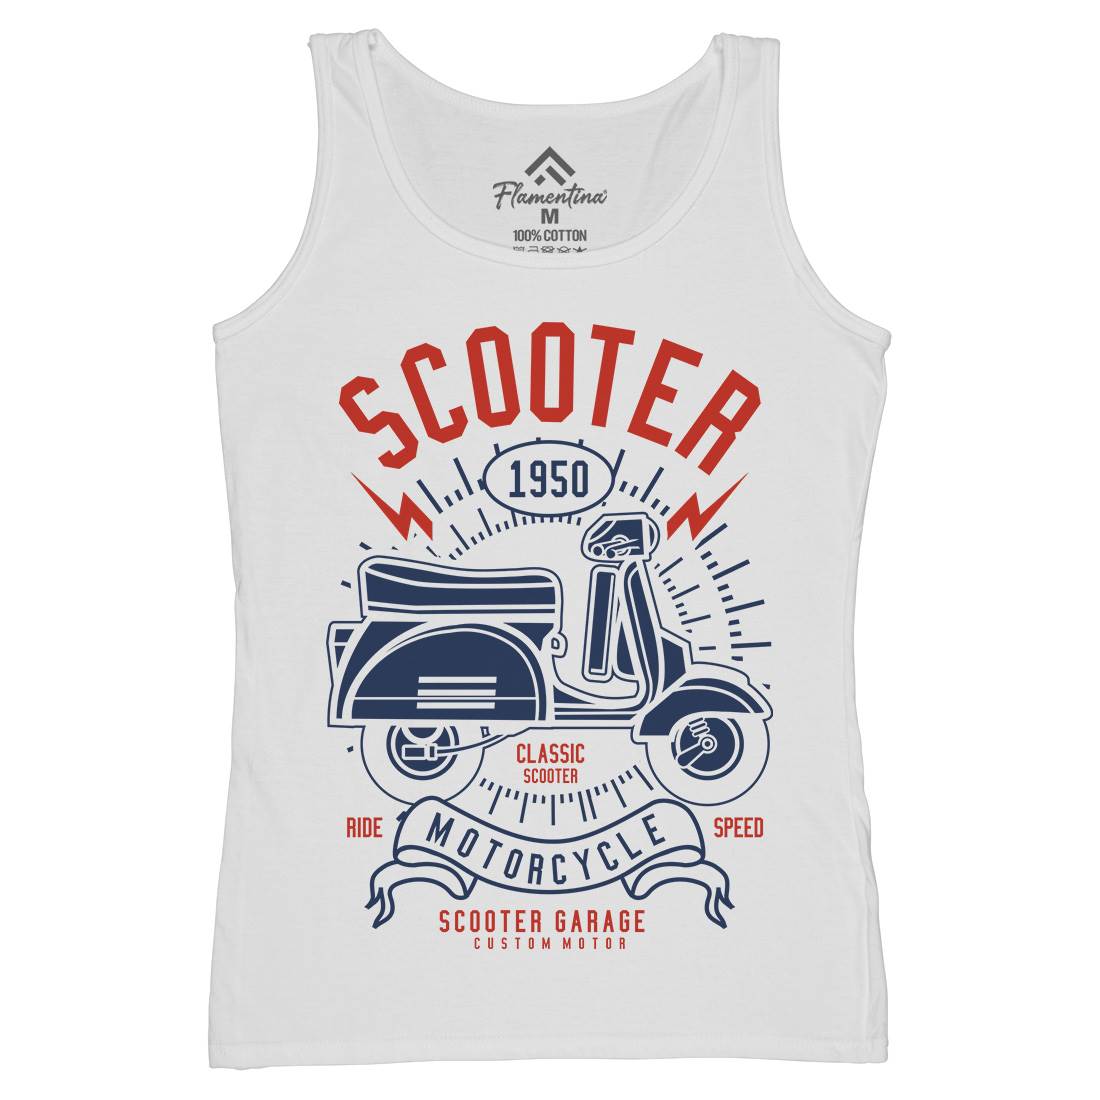 Scooter Womens Organic Tank Top Vest Motorcycles A276